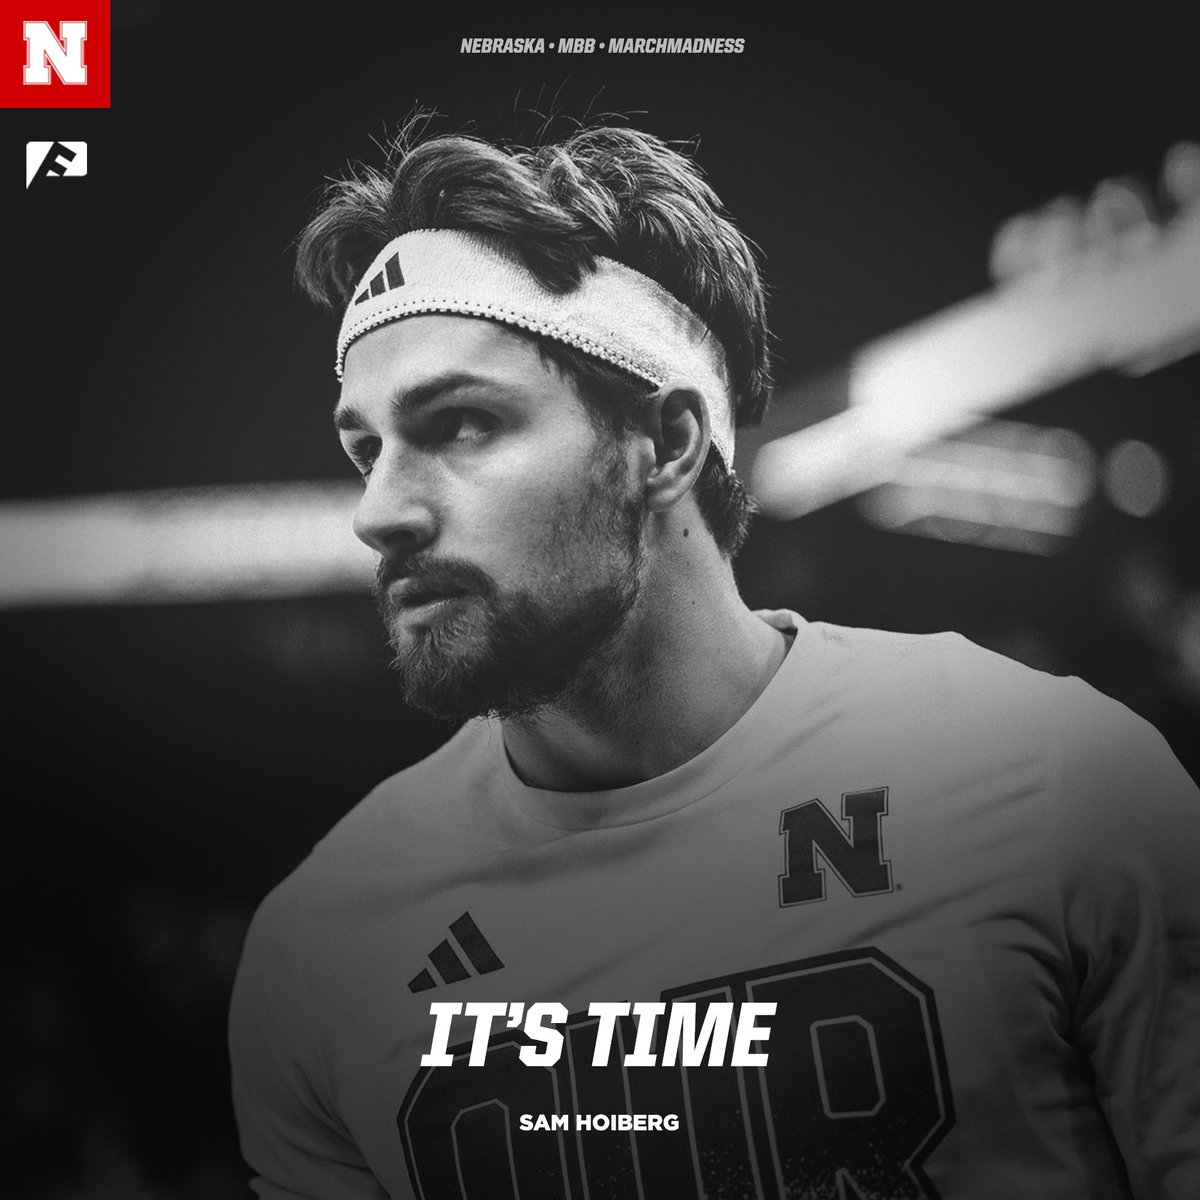 Today's the day. Good luck to @samhoiberg⁠ and @huskerMBB at #marchmadness. ⁠ 📝 Read his story 'It's Time' to get ready for tonight. huskers.com/news/2024/3/21… ⁠ #fanword #B1GMBBT #huskers #gbr #ncaa #marchmadness2024